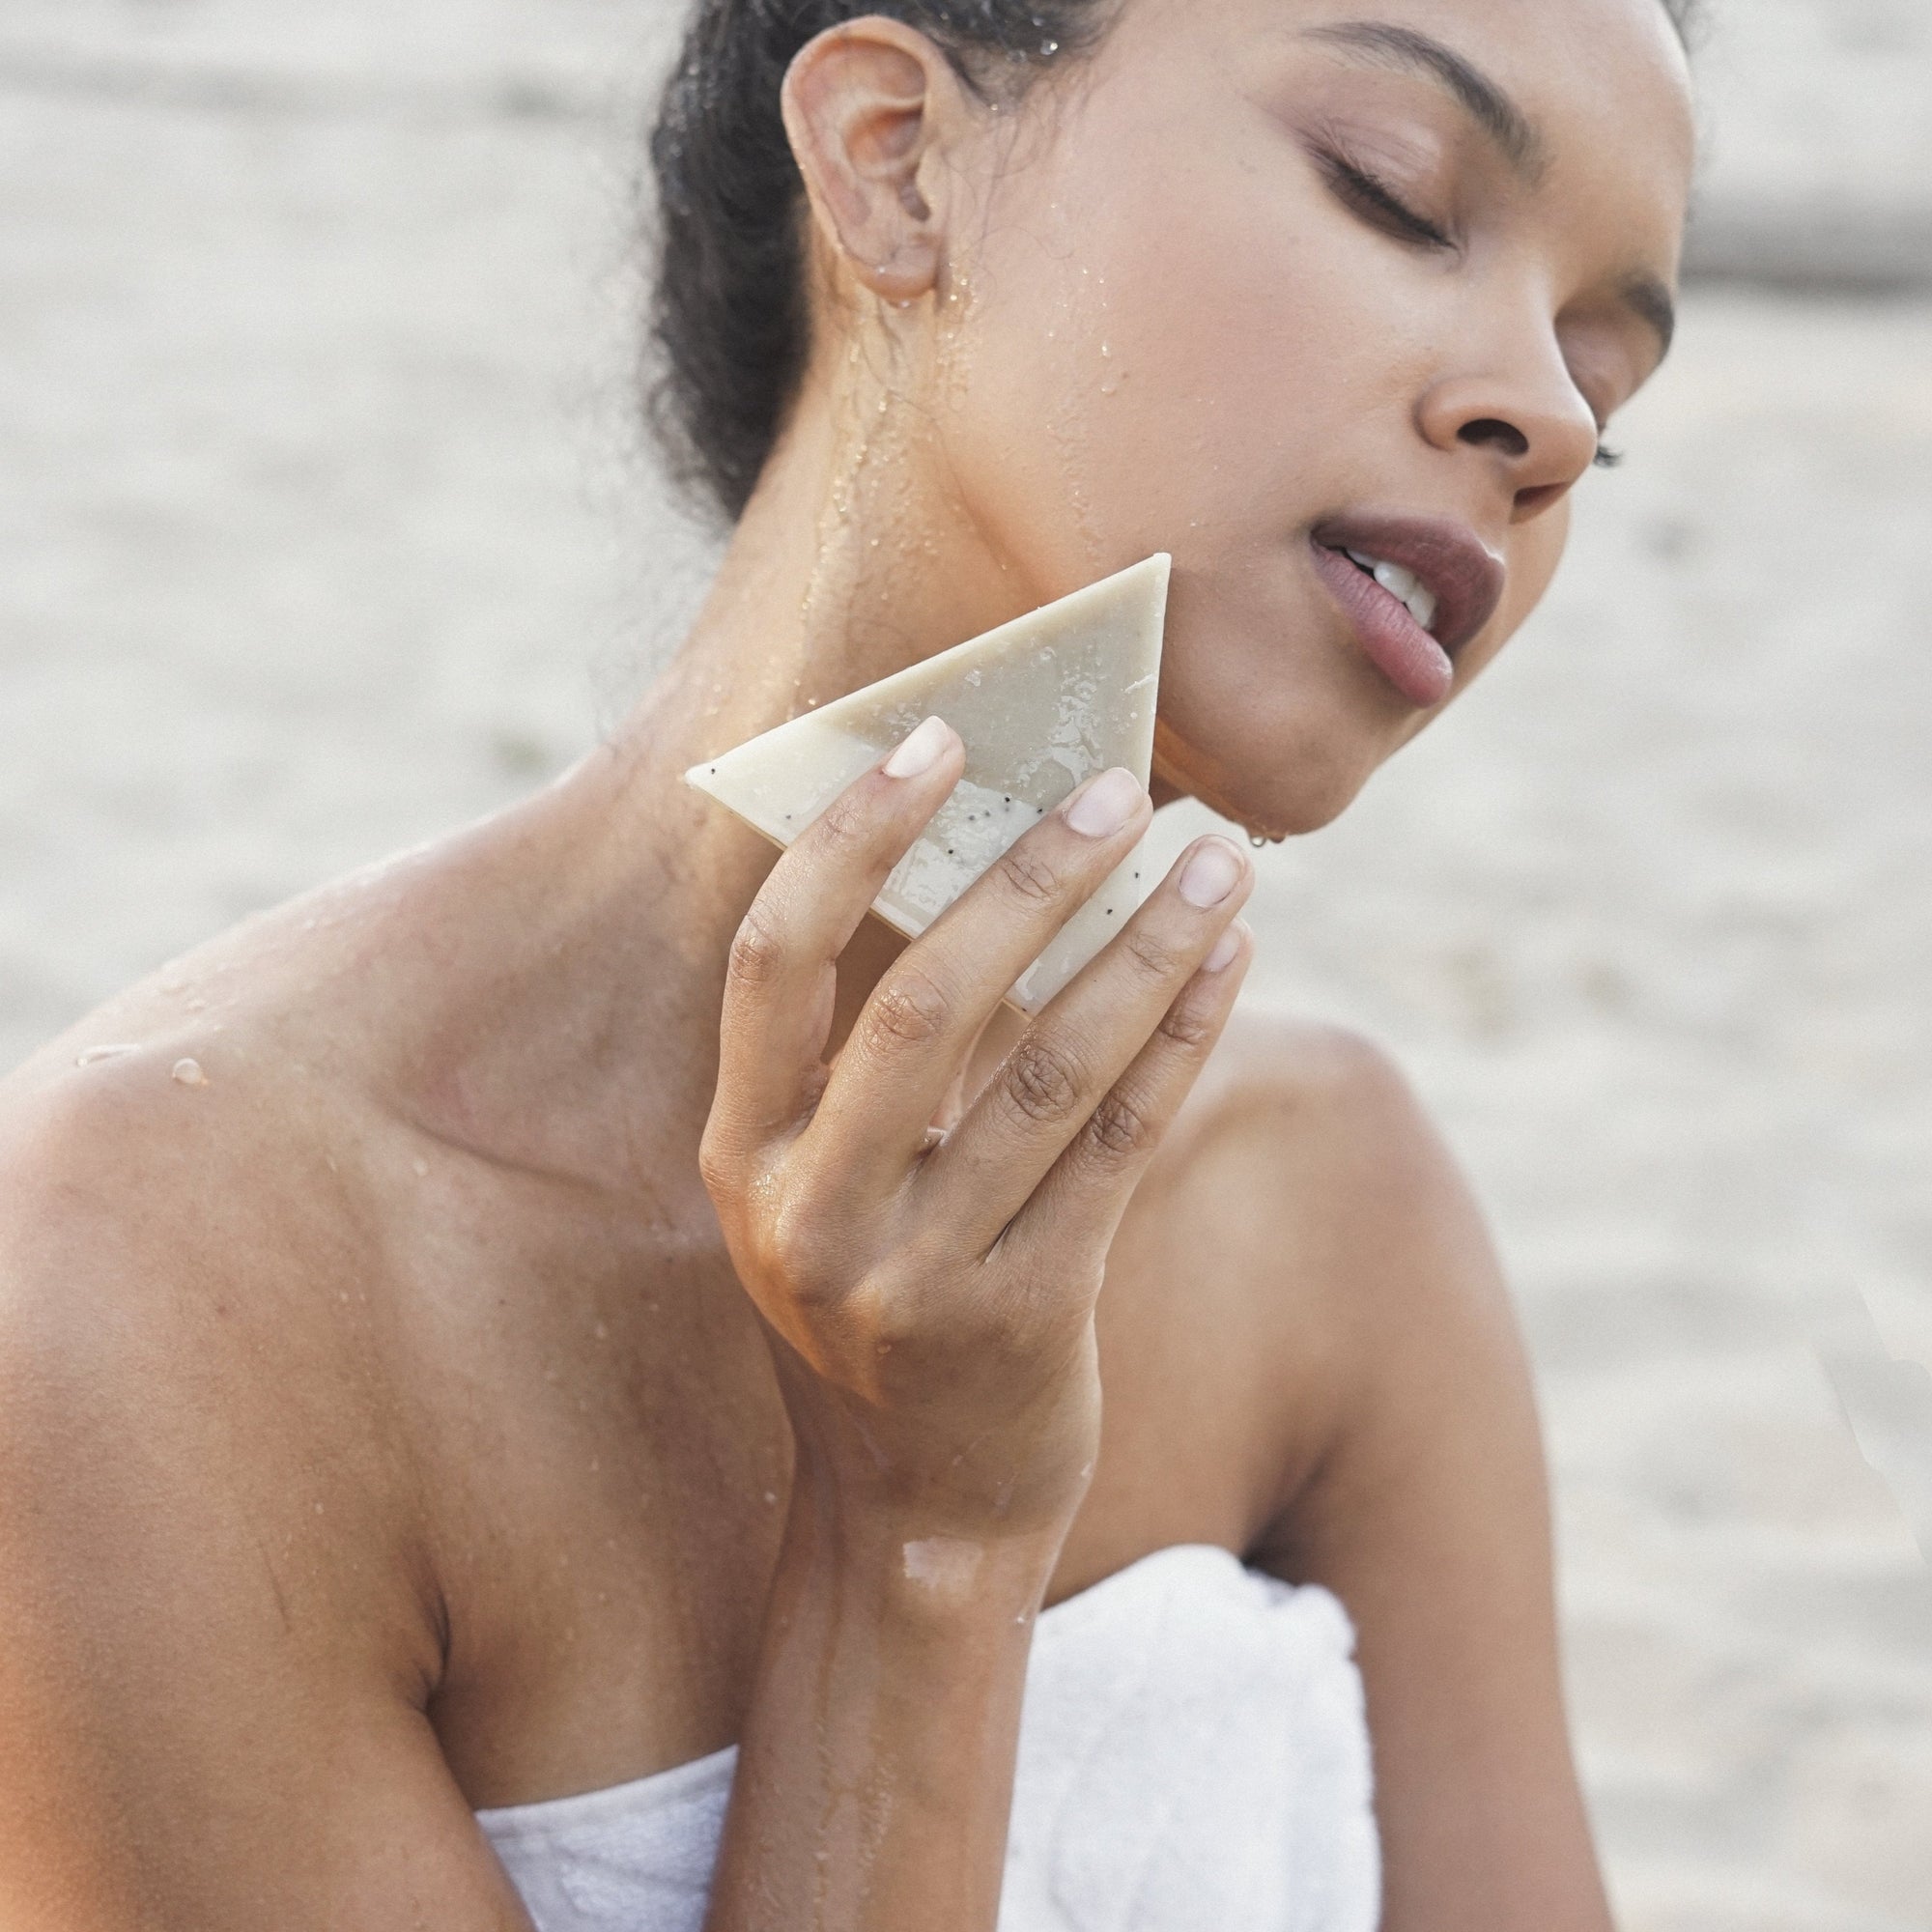 A woman at the beach wrapped in a white towel holding a triangle soap close to her face